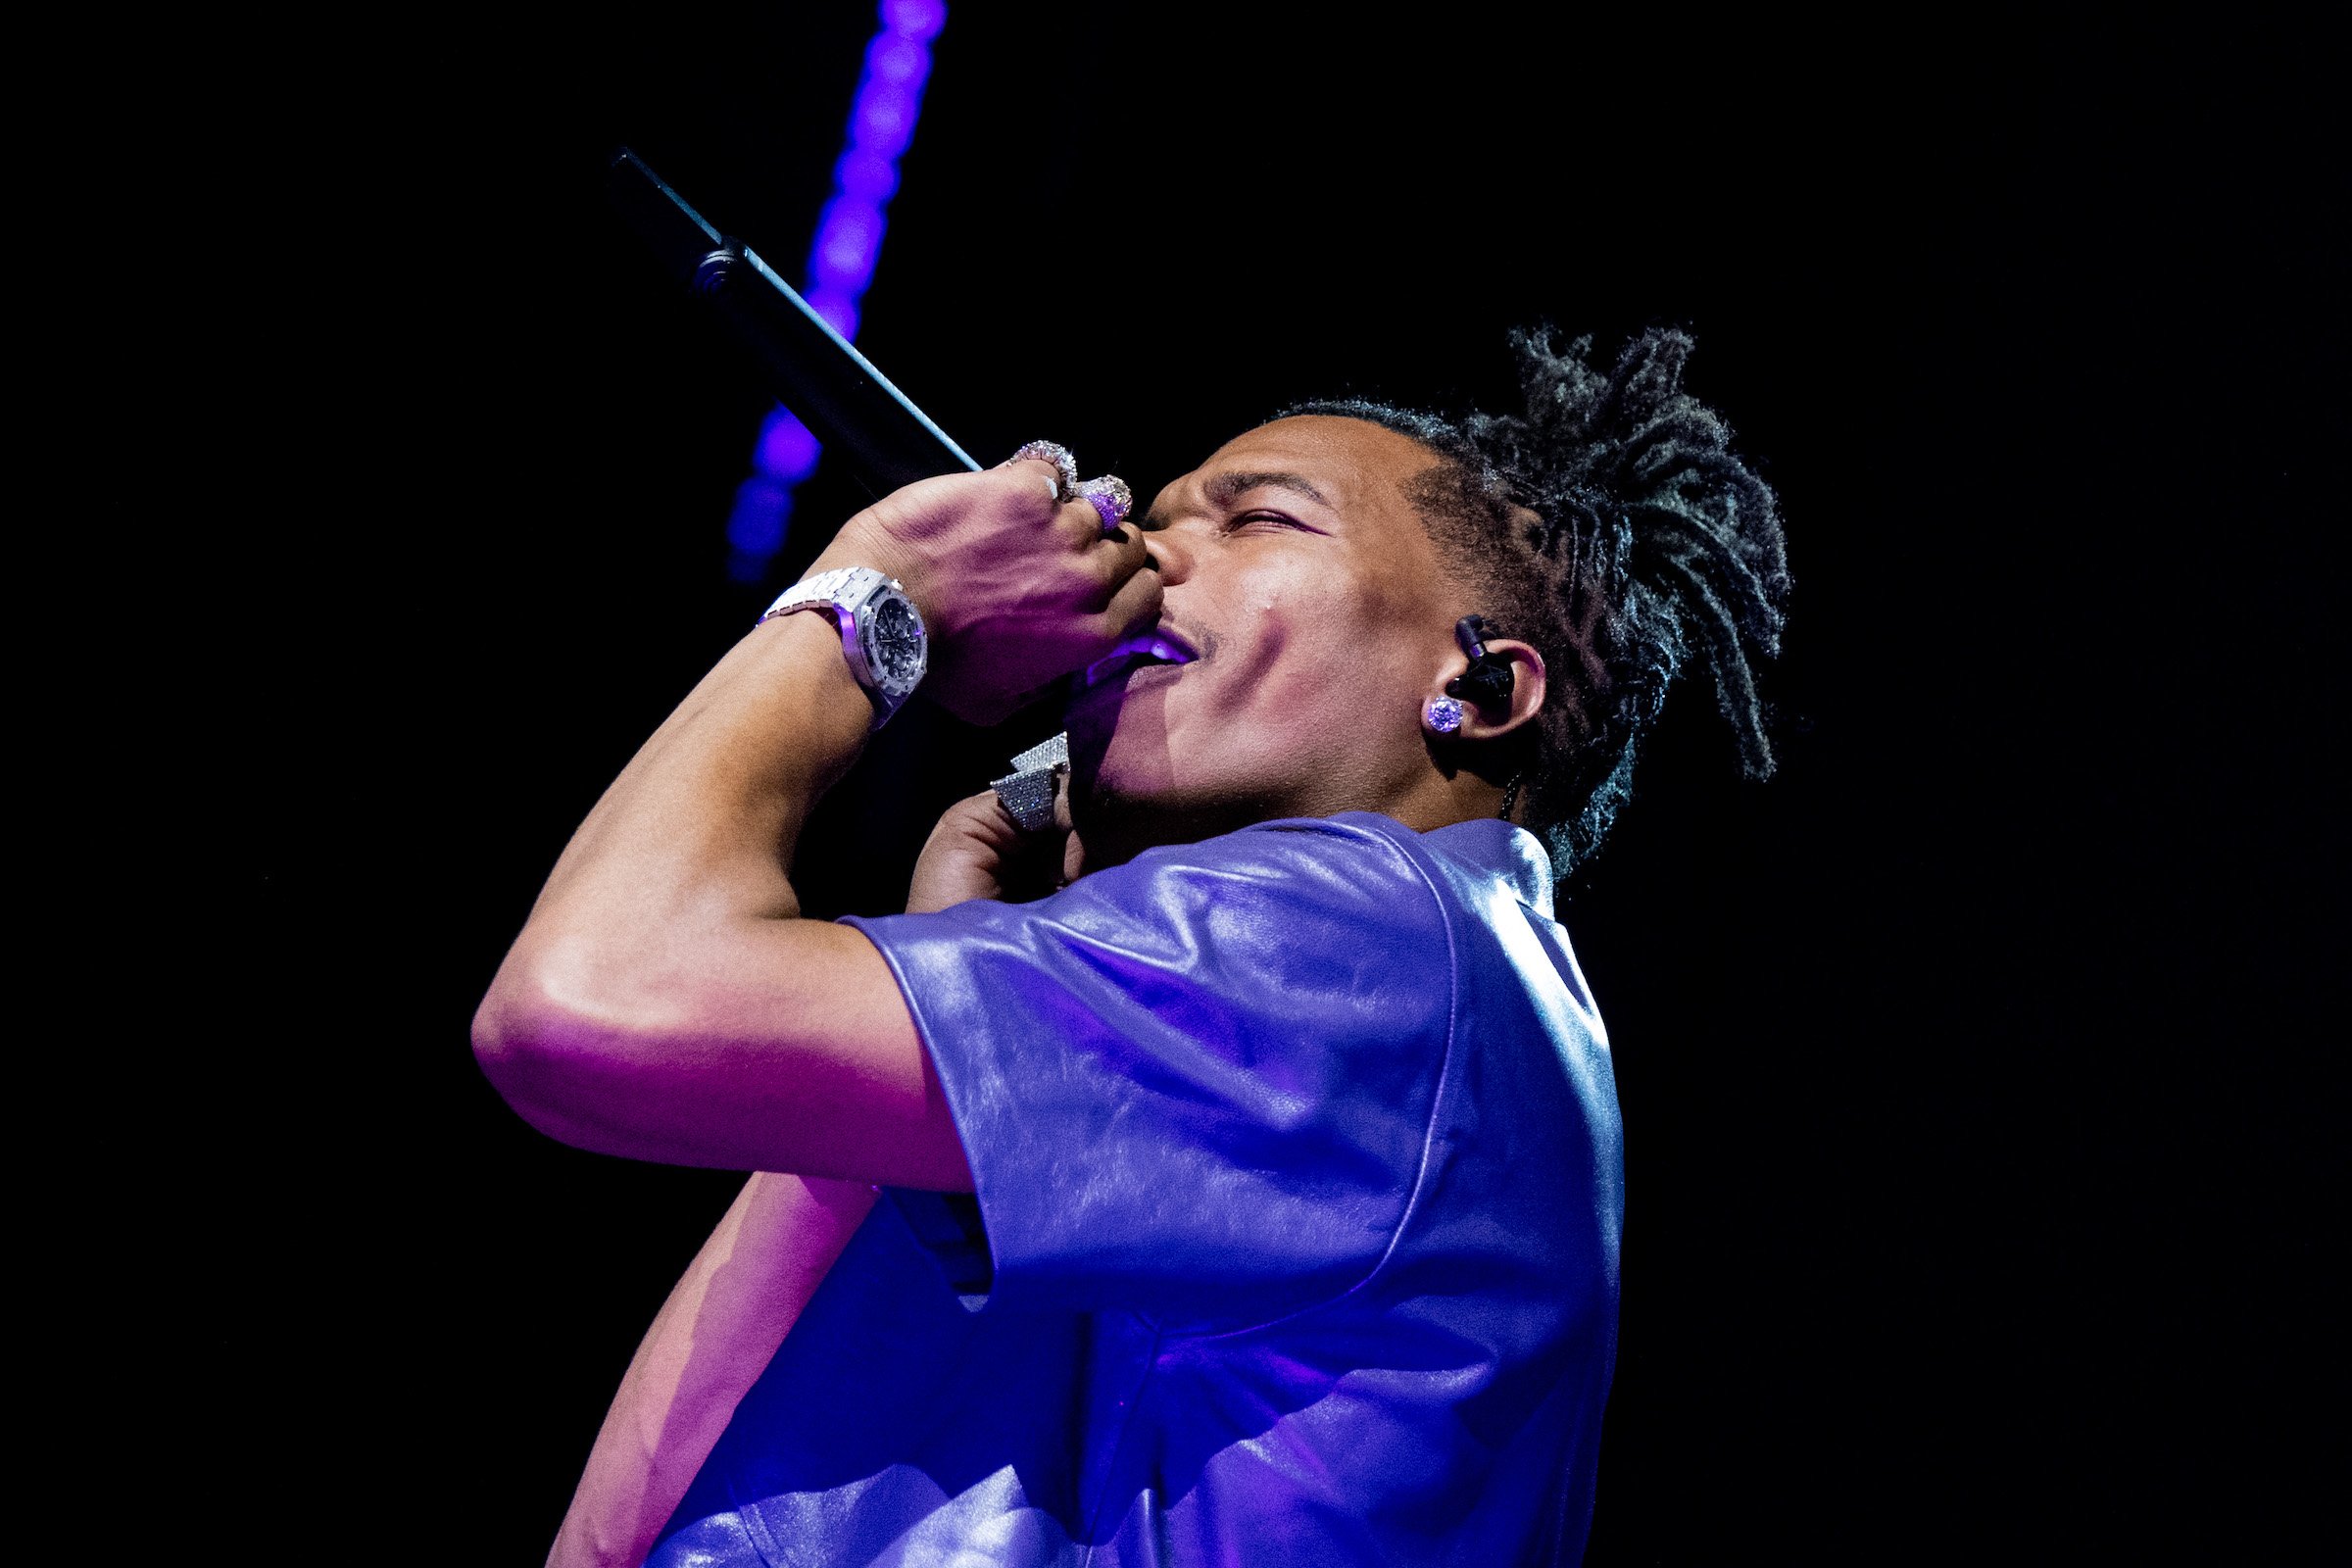 Lil Baby, who released a music video for his song 'Heyy,' performing wearing blue